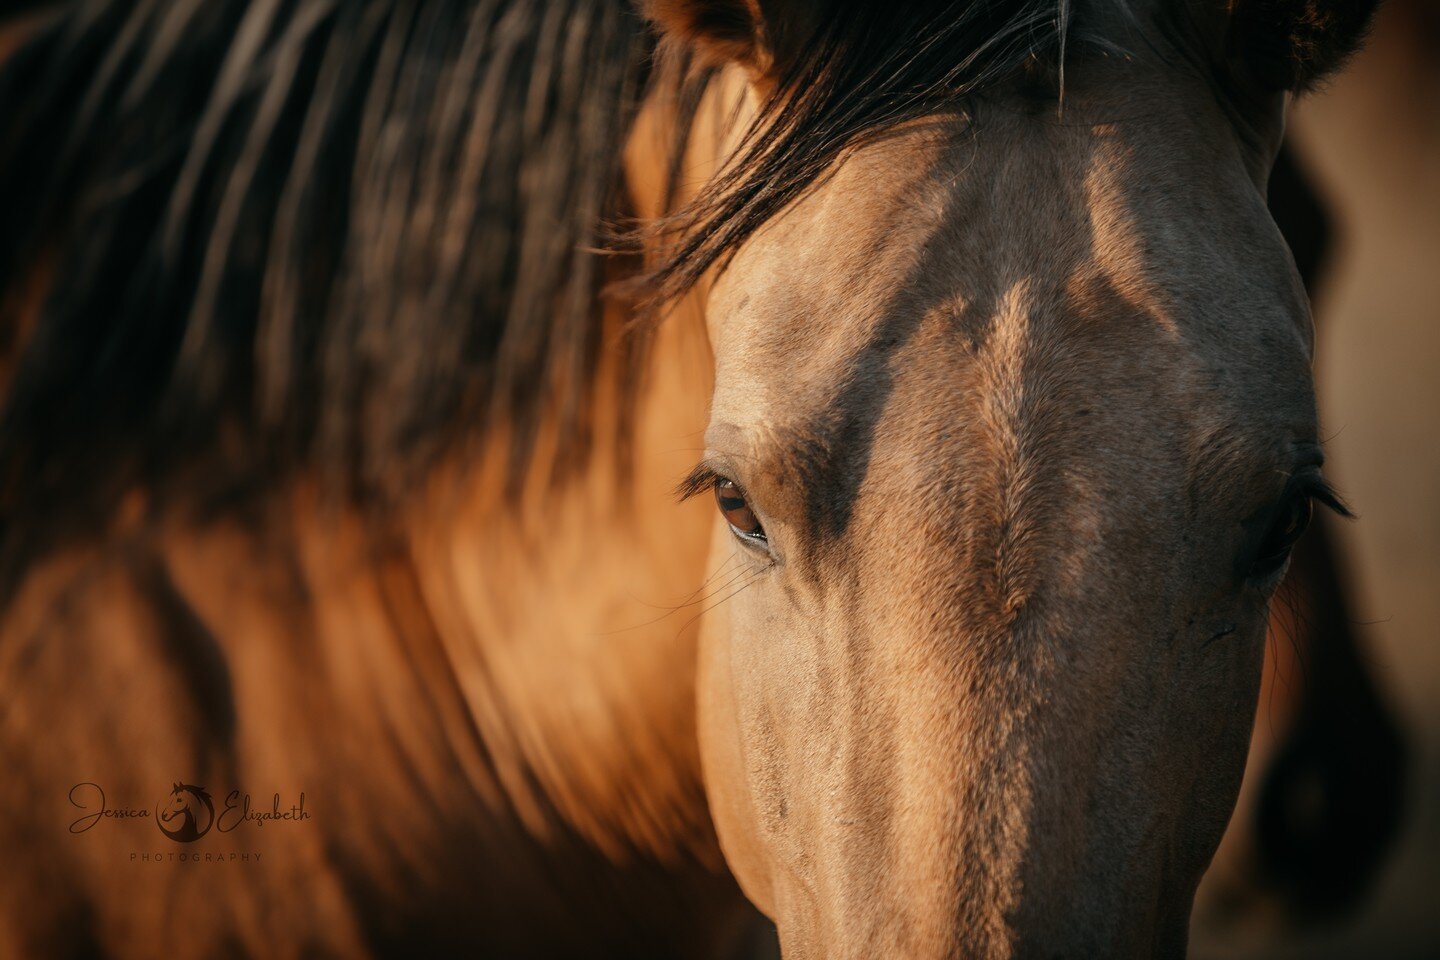 &quot;When a rider gazes into a horse's eyes they find a part of themselves thought never to be found...&quot;

-unknown
#horsephotography #equinephotographersnetwork #horsesofinstagram #gallatinhorsephotographer #nashvillehorsephotographer